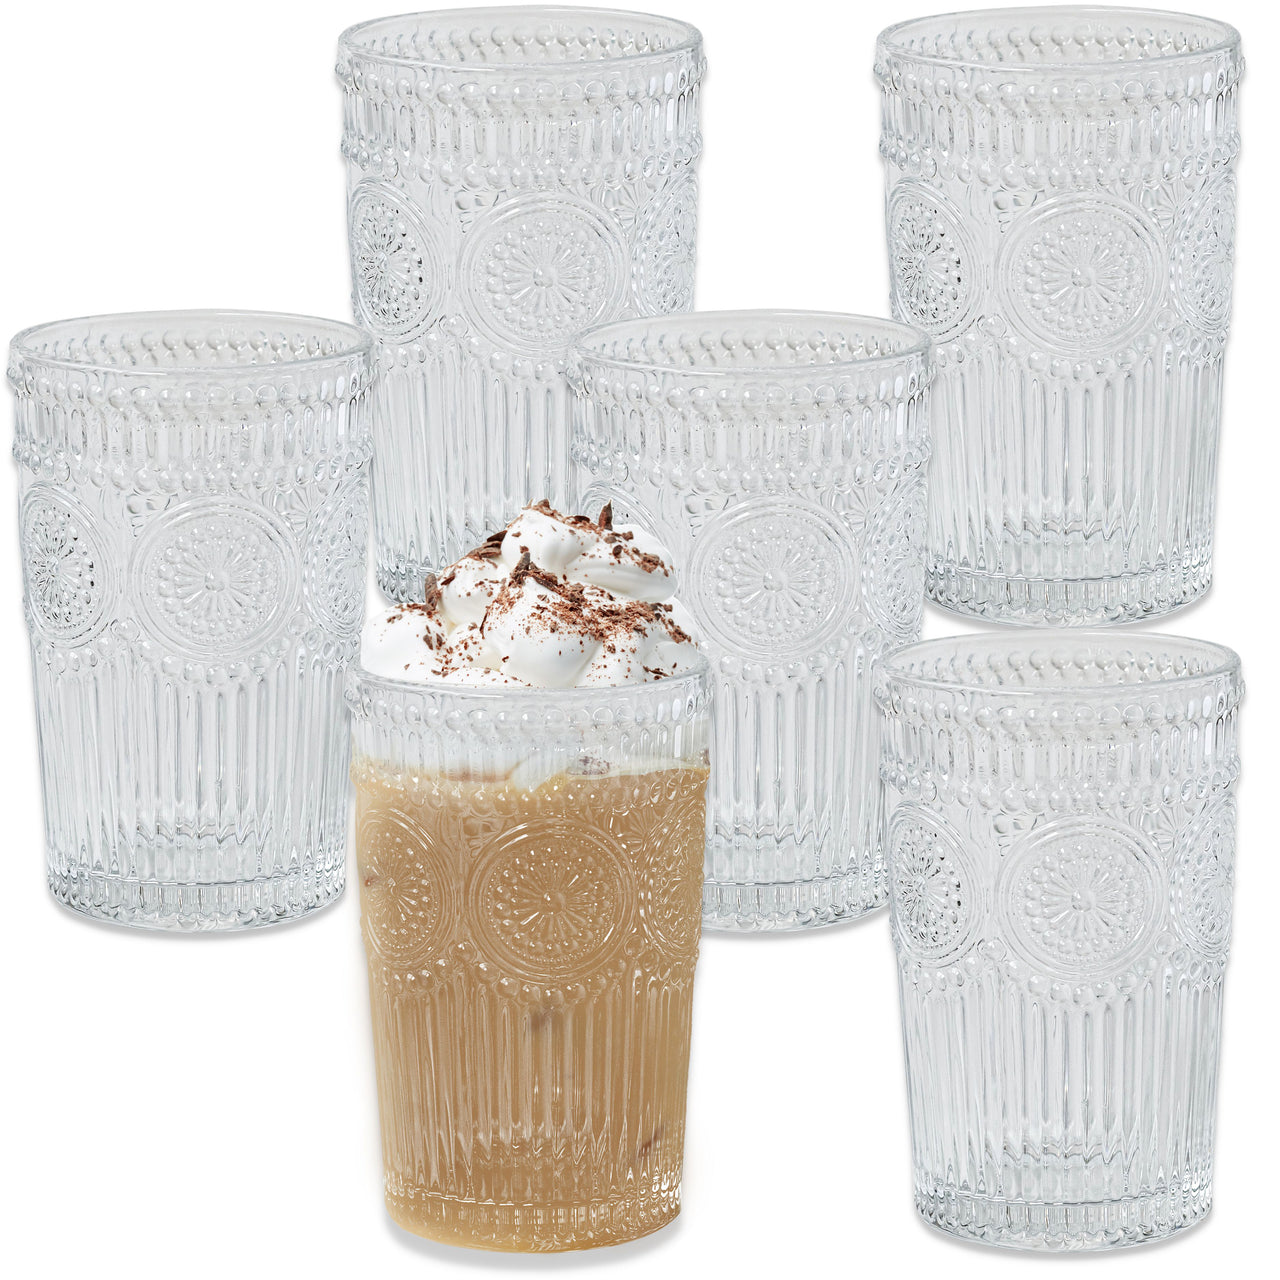 10 oz. Textured Beaded Clear Glass (Set of 6) by Kate Aspen